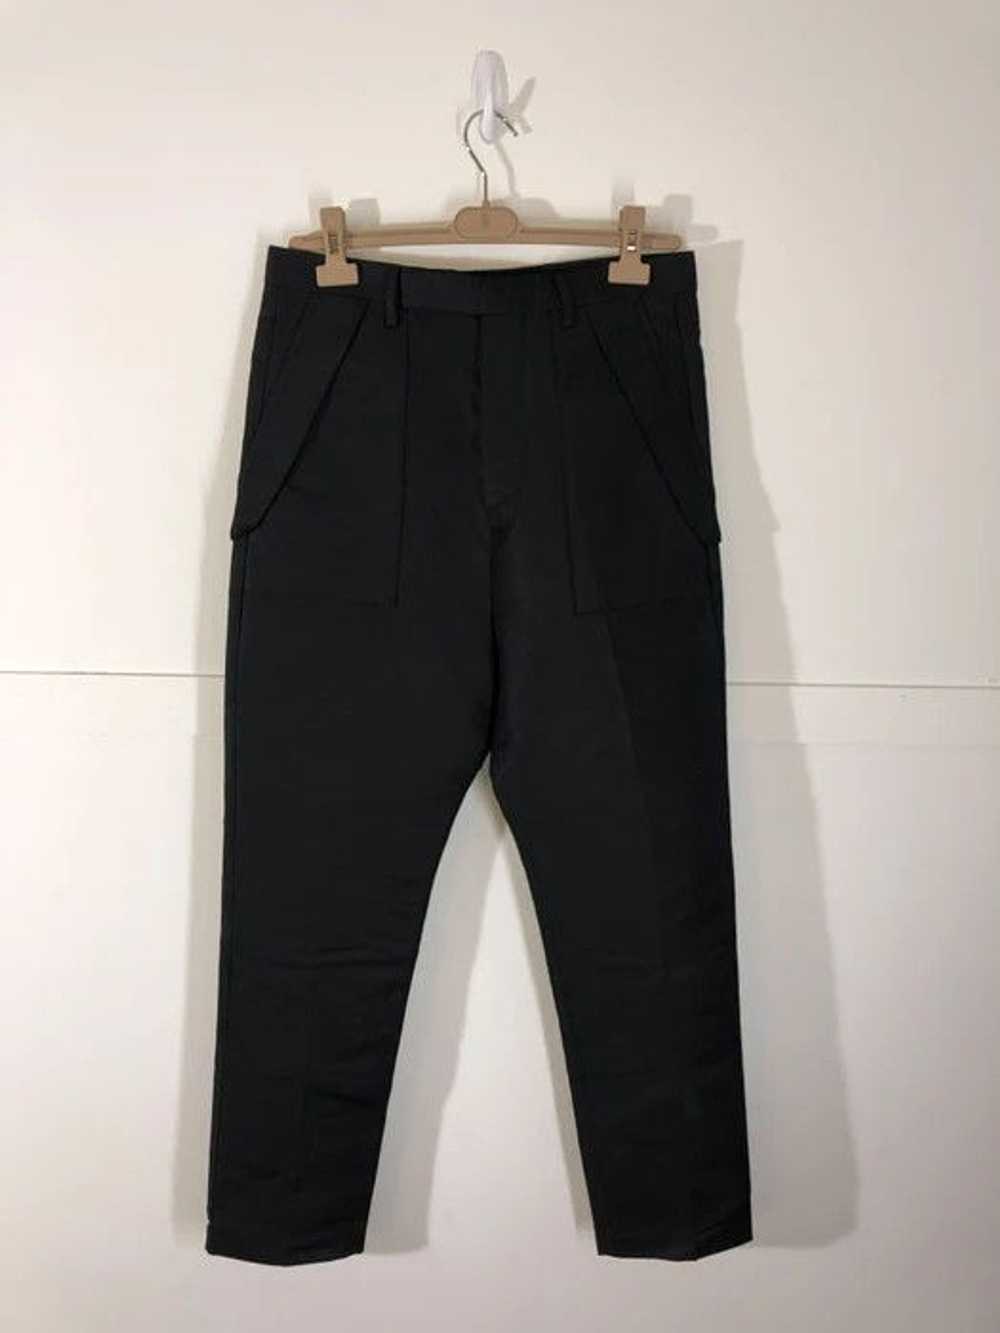 Rick Owens Tapered Trousers - image 5